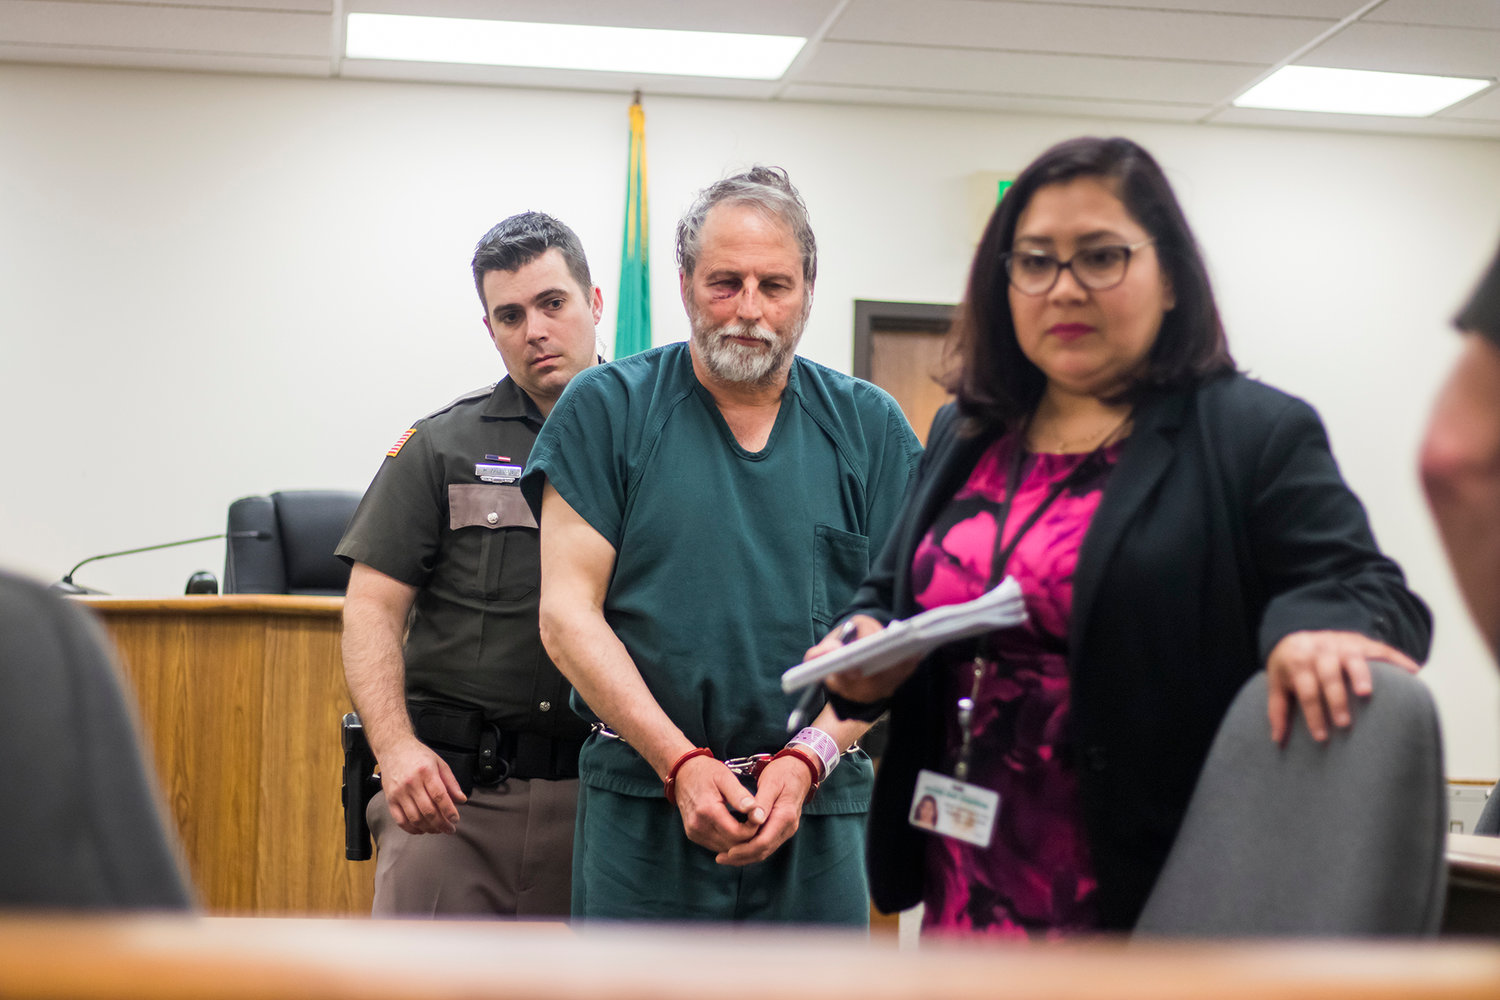 Edward L. Danzer, center, 63, of Tenino makes an appearance Friday afternoon in Lewis County Superior Court following an alleged assault of an attorney on Thursday.